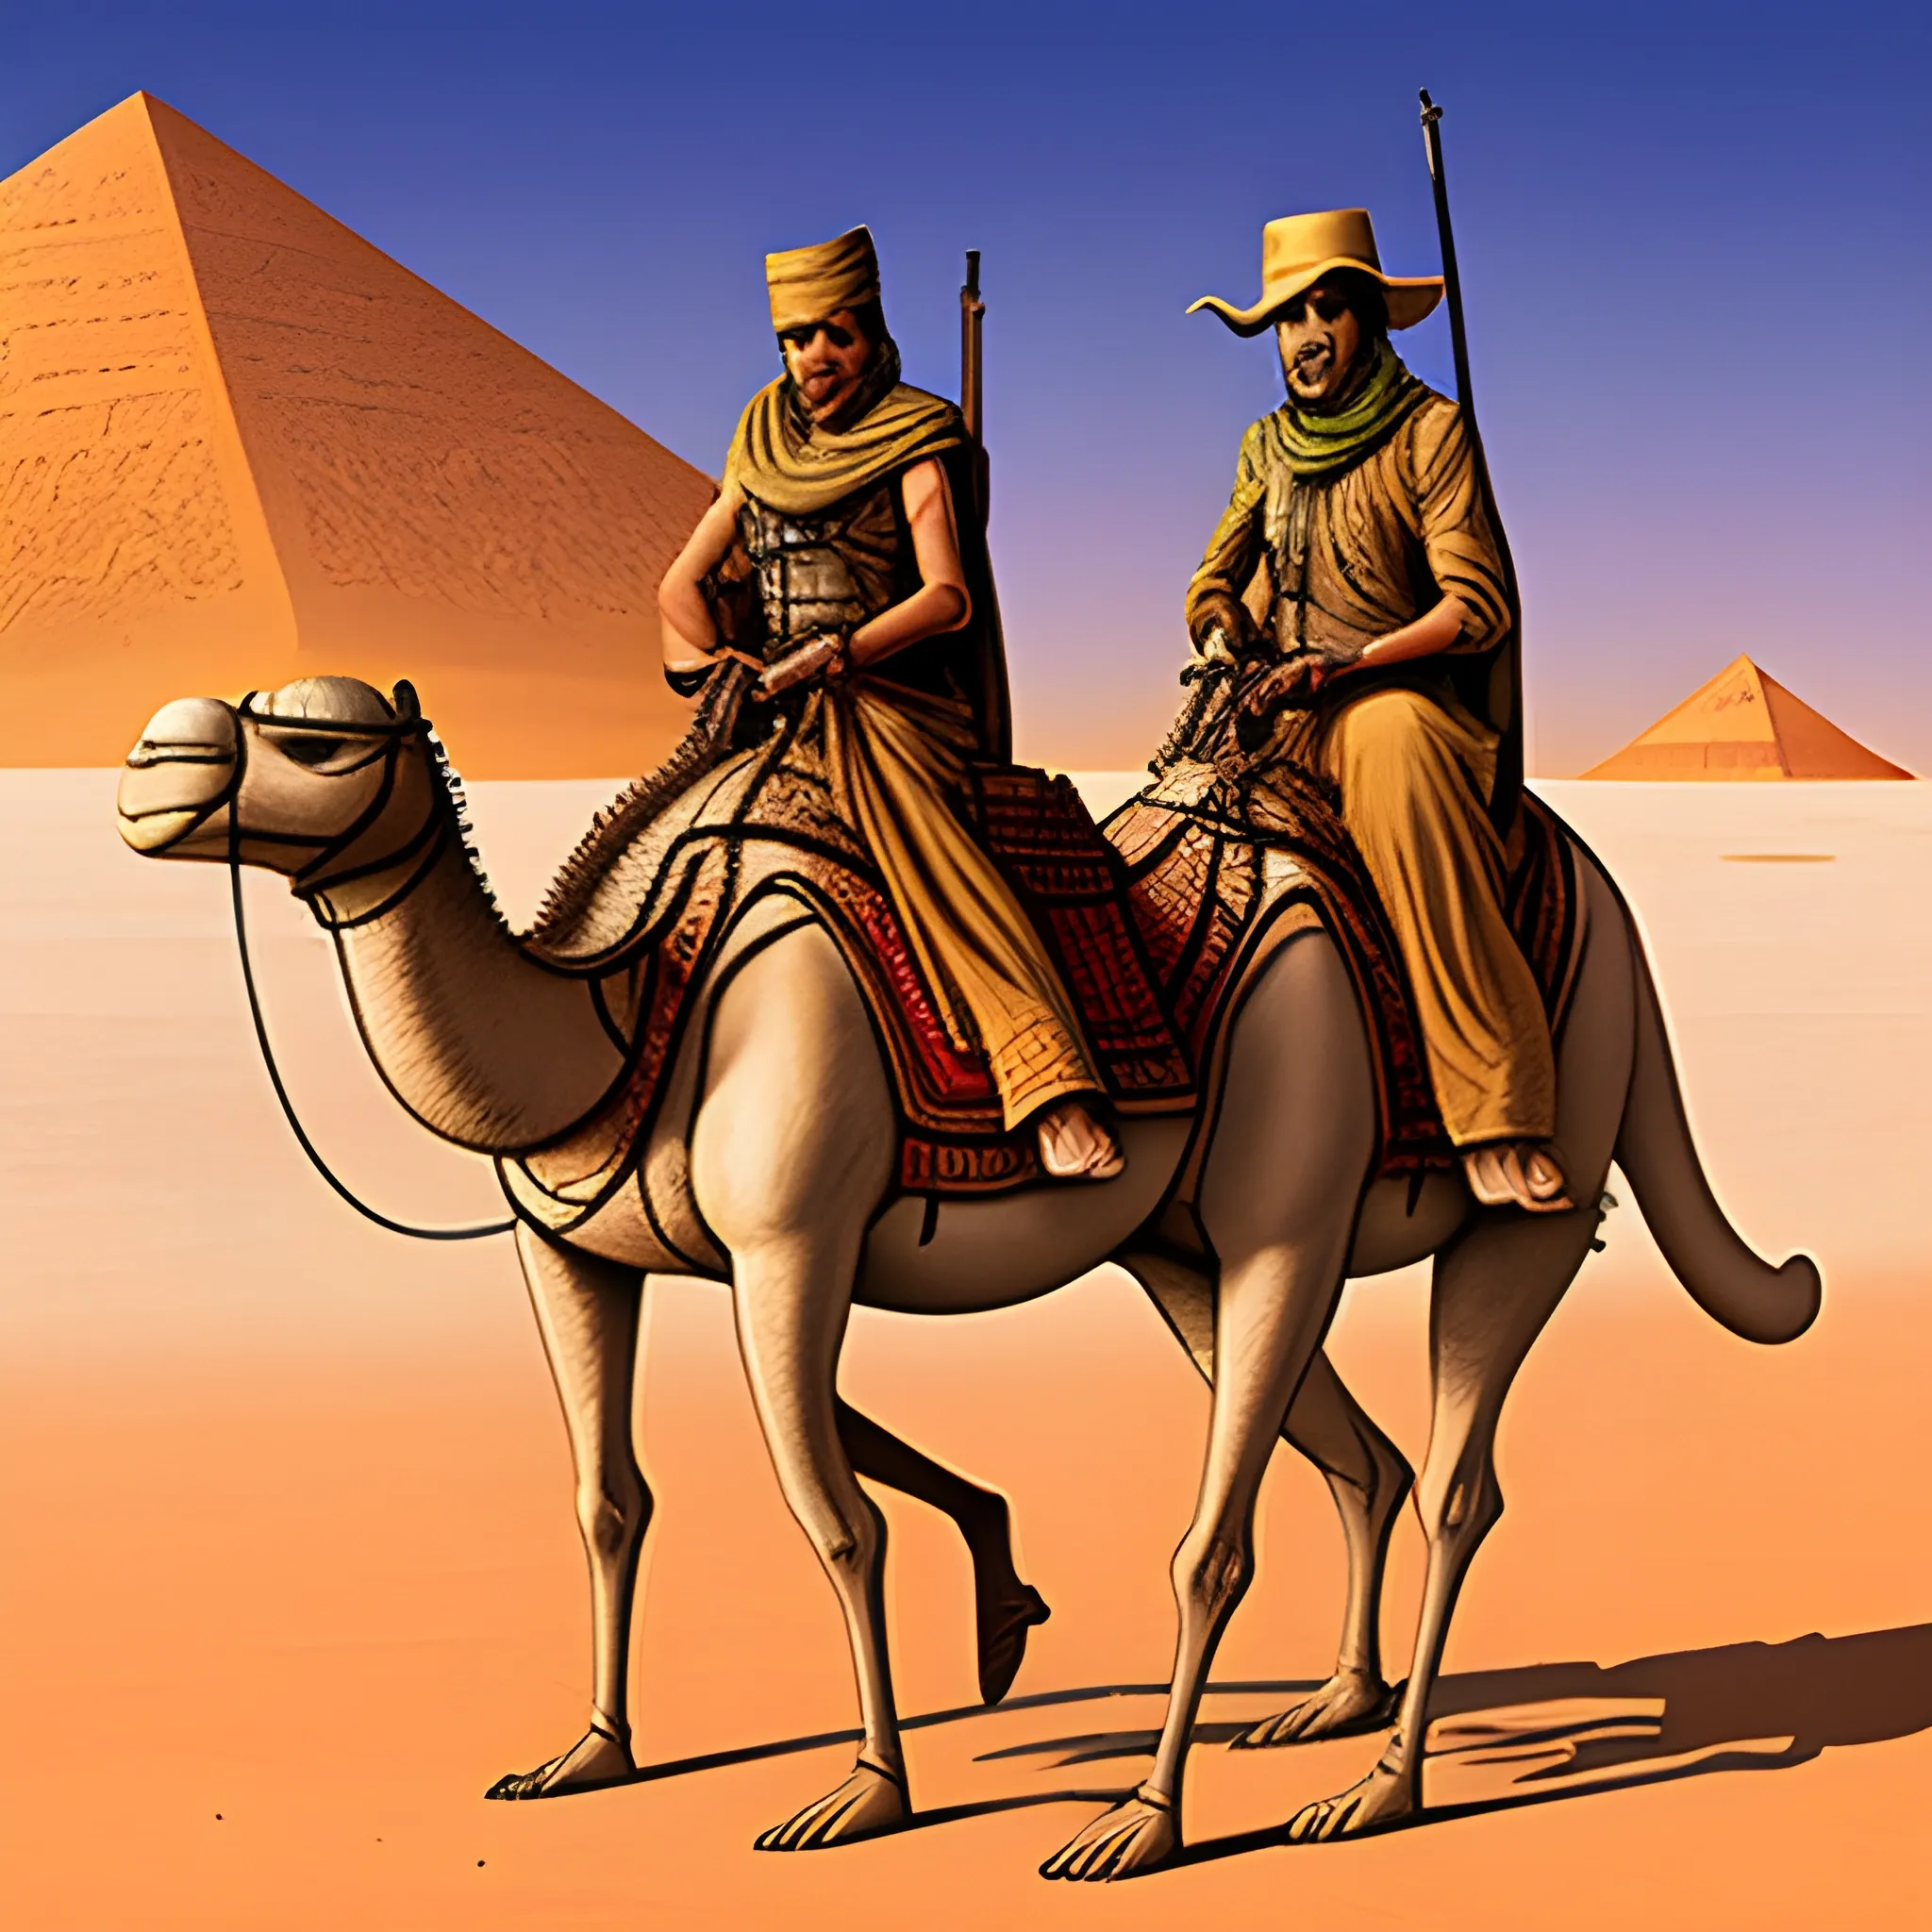 yemen raiders riding no camels with rifle, in thee desert, drawn in Jean Giraud's art style
